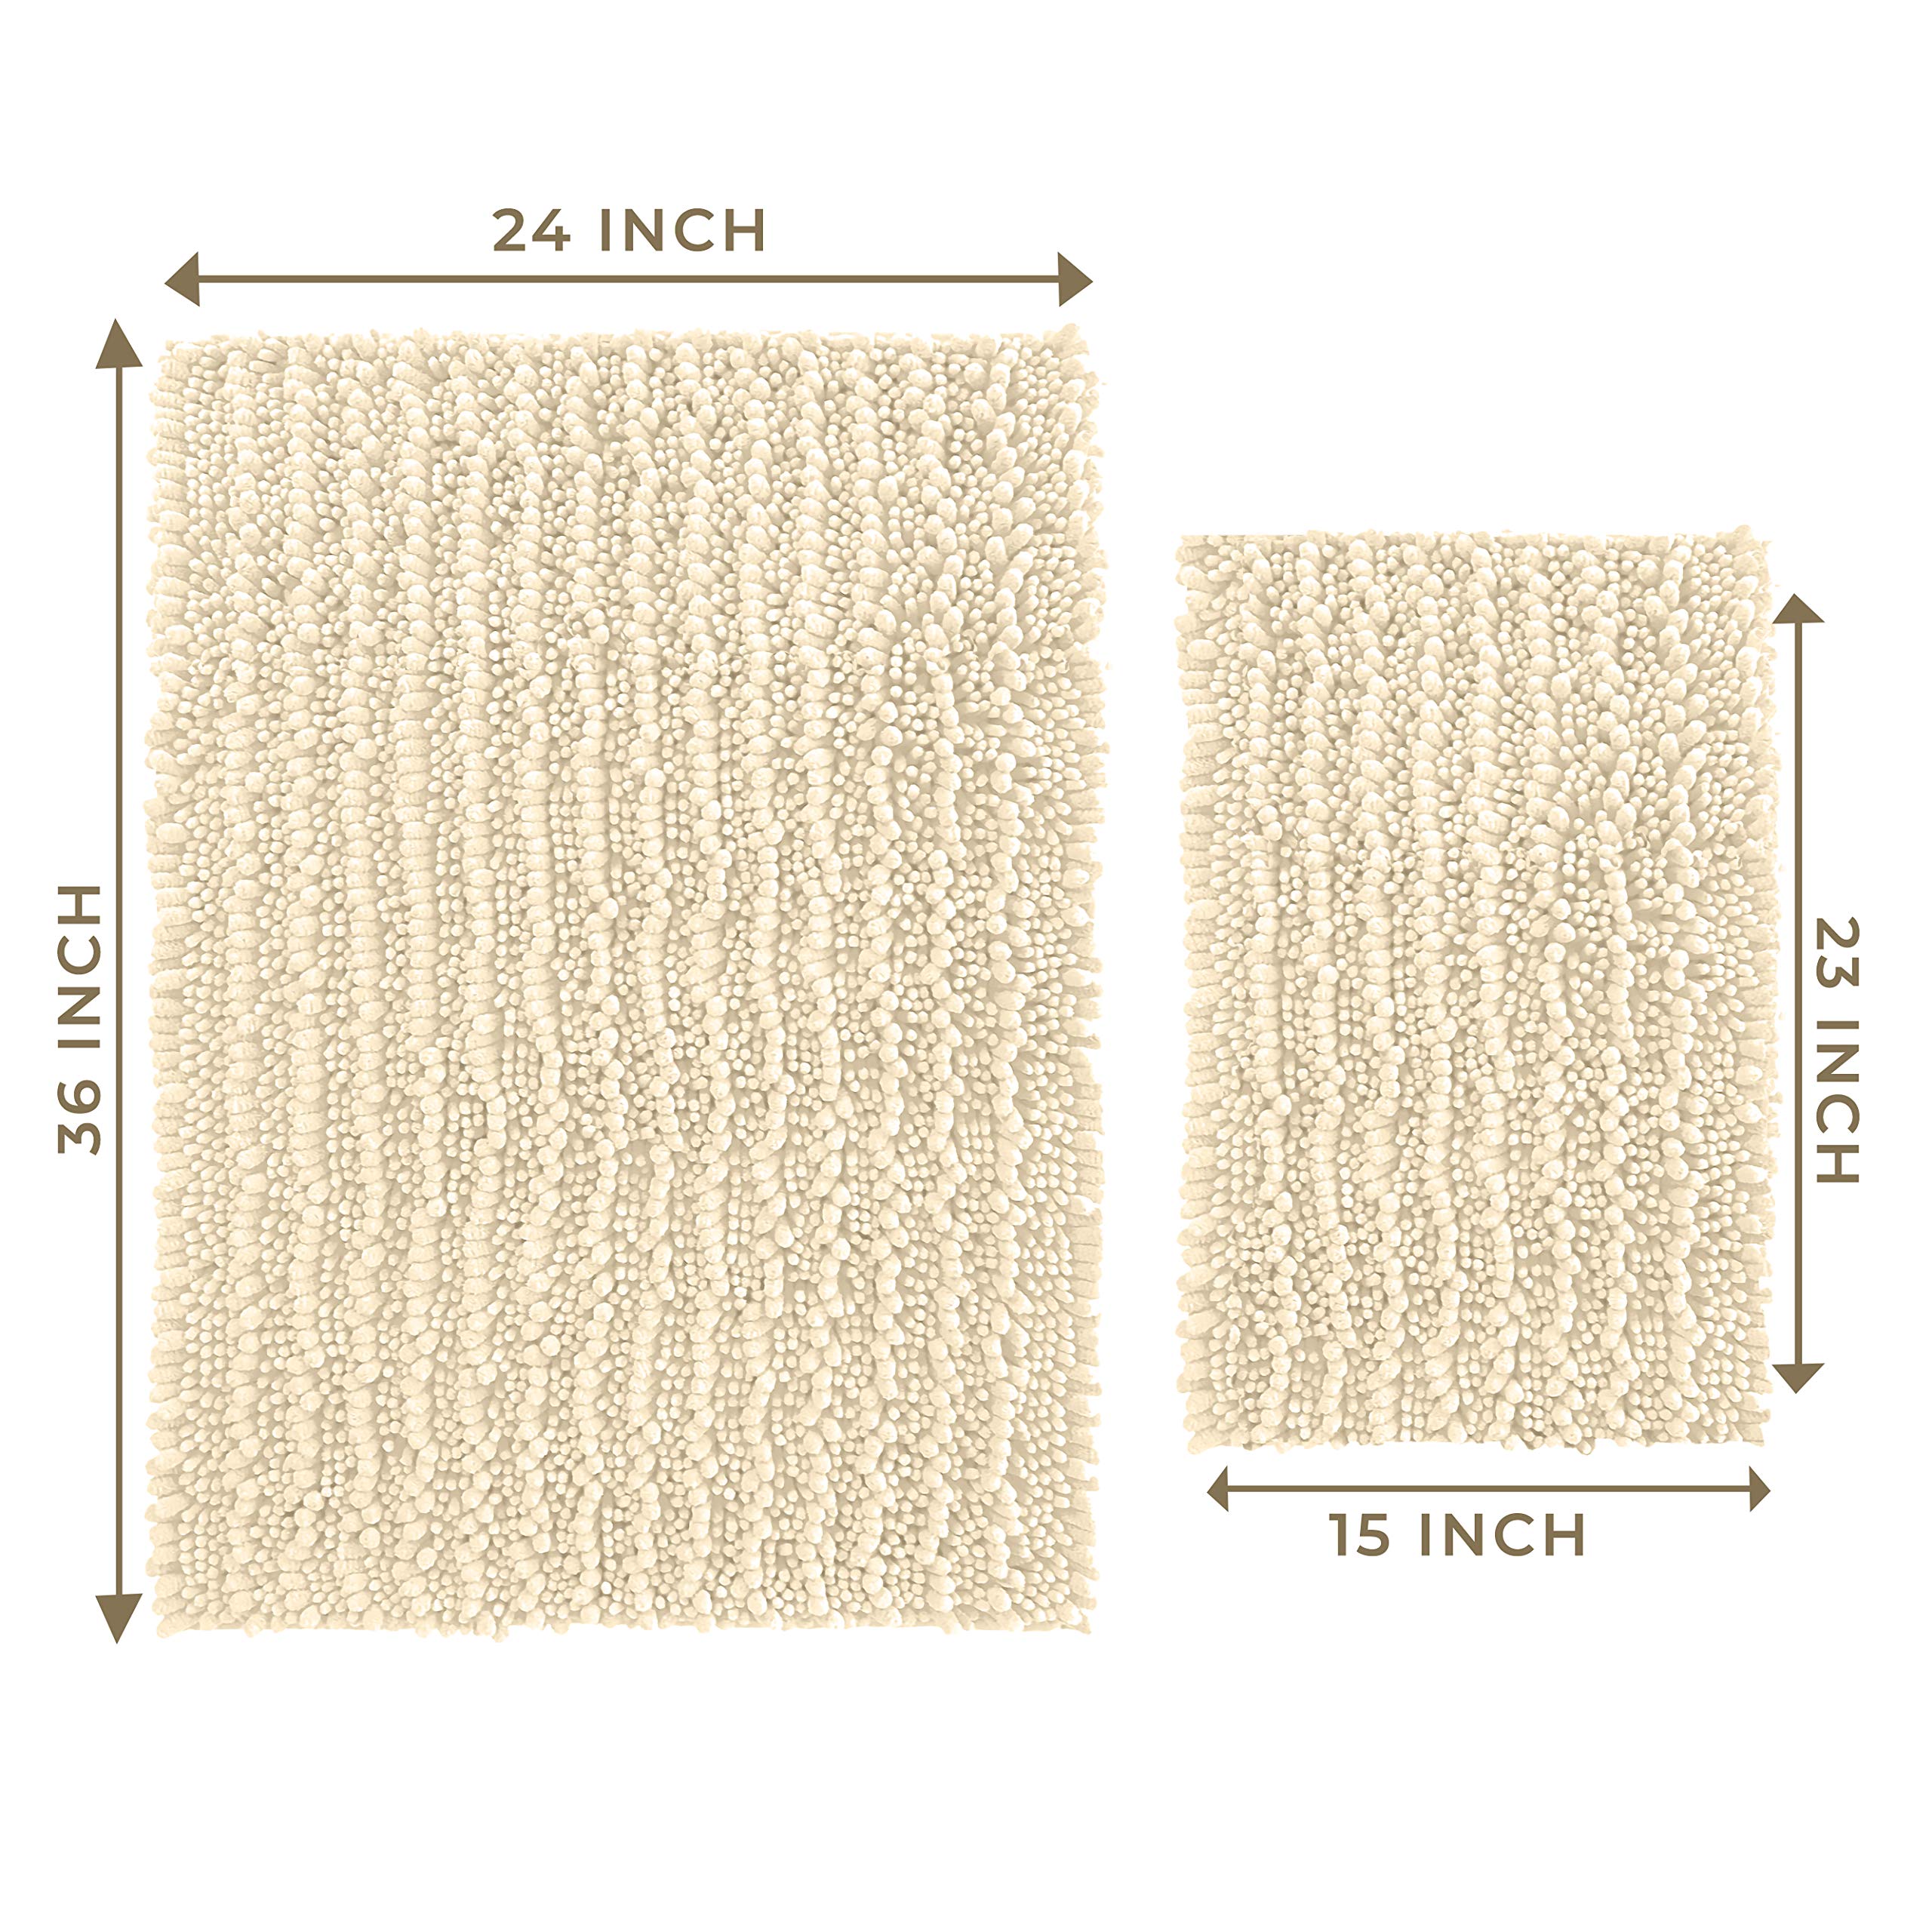 Zebrux Non Slip Thick Shaggy Bathroom Rugs, Bath Mats for Bathroom Extra Soft and Absorbent - Striped Bath Rugs Set for Indoor/Kitchen (15 x 23 +24 x 36'', Cream)  - Very Good